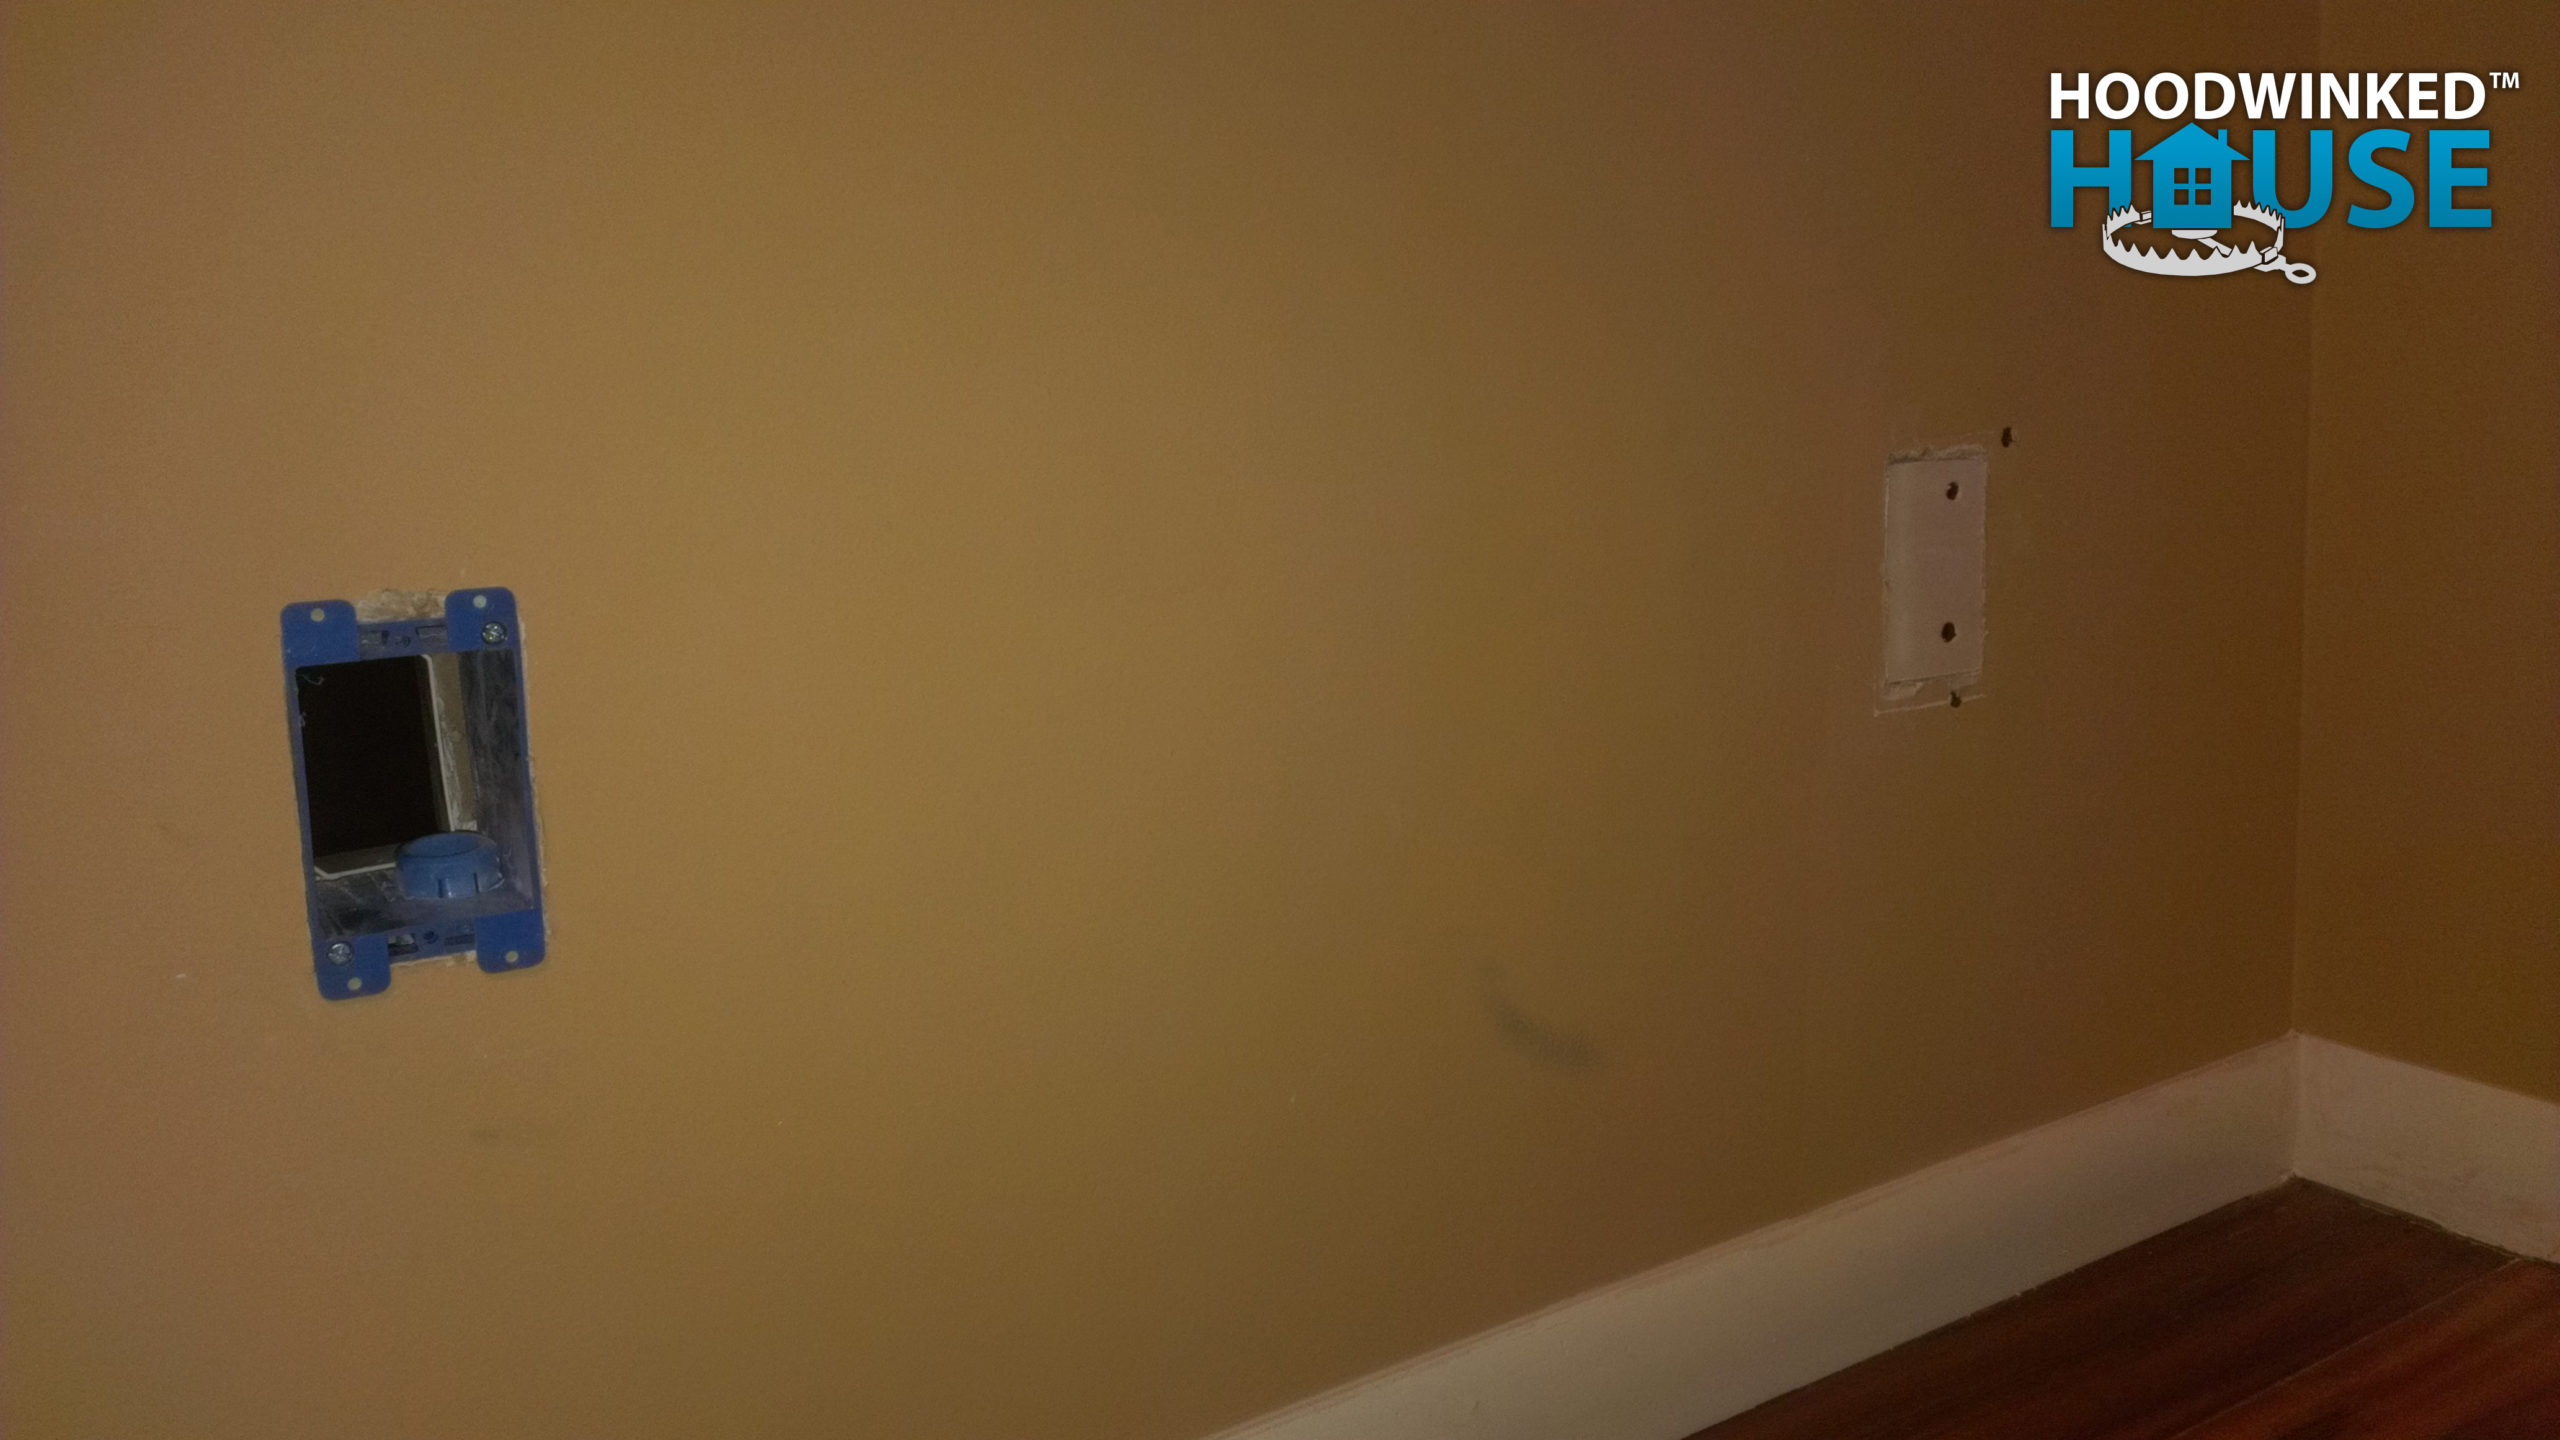 A bedroom wall with holes for junction boxes, one patched with drywall.